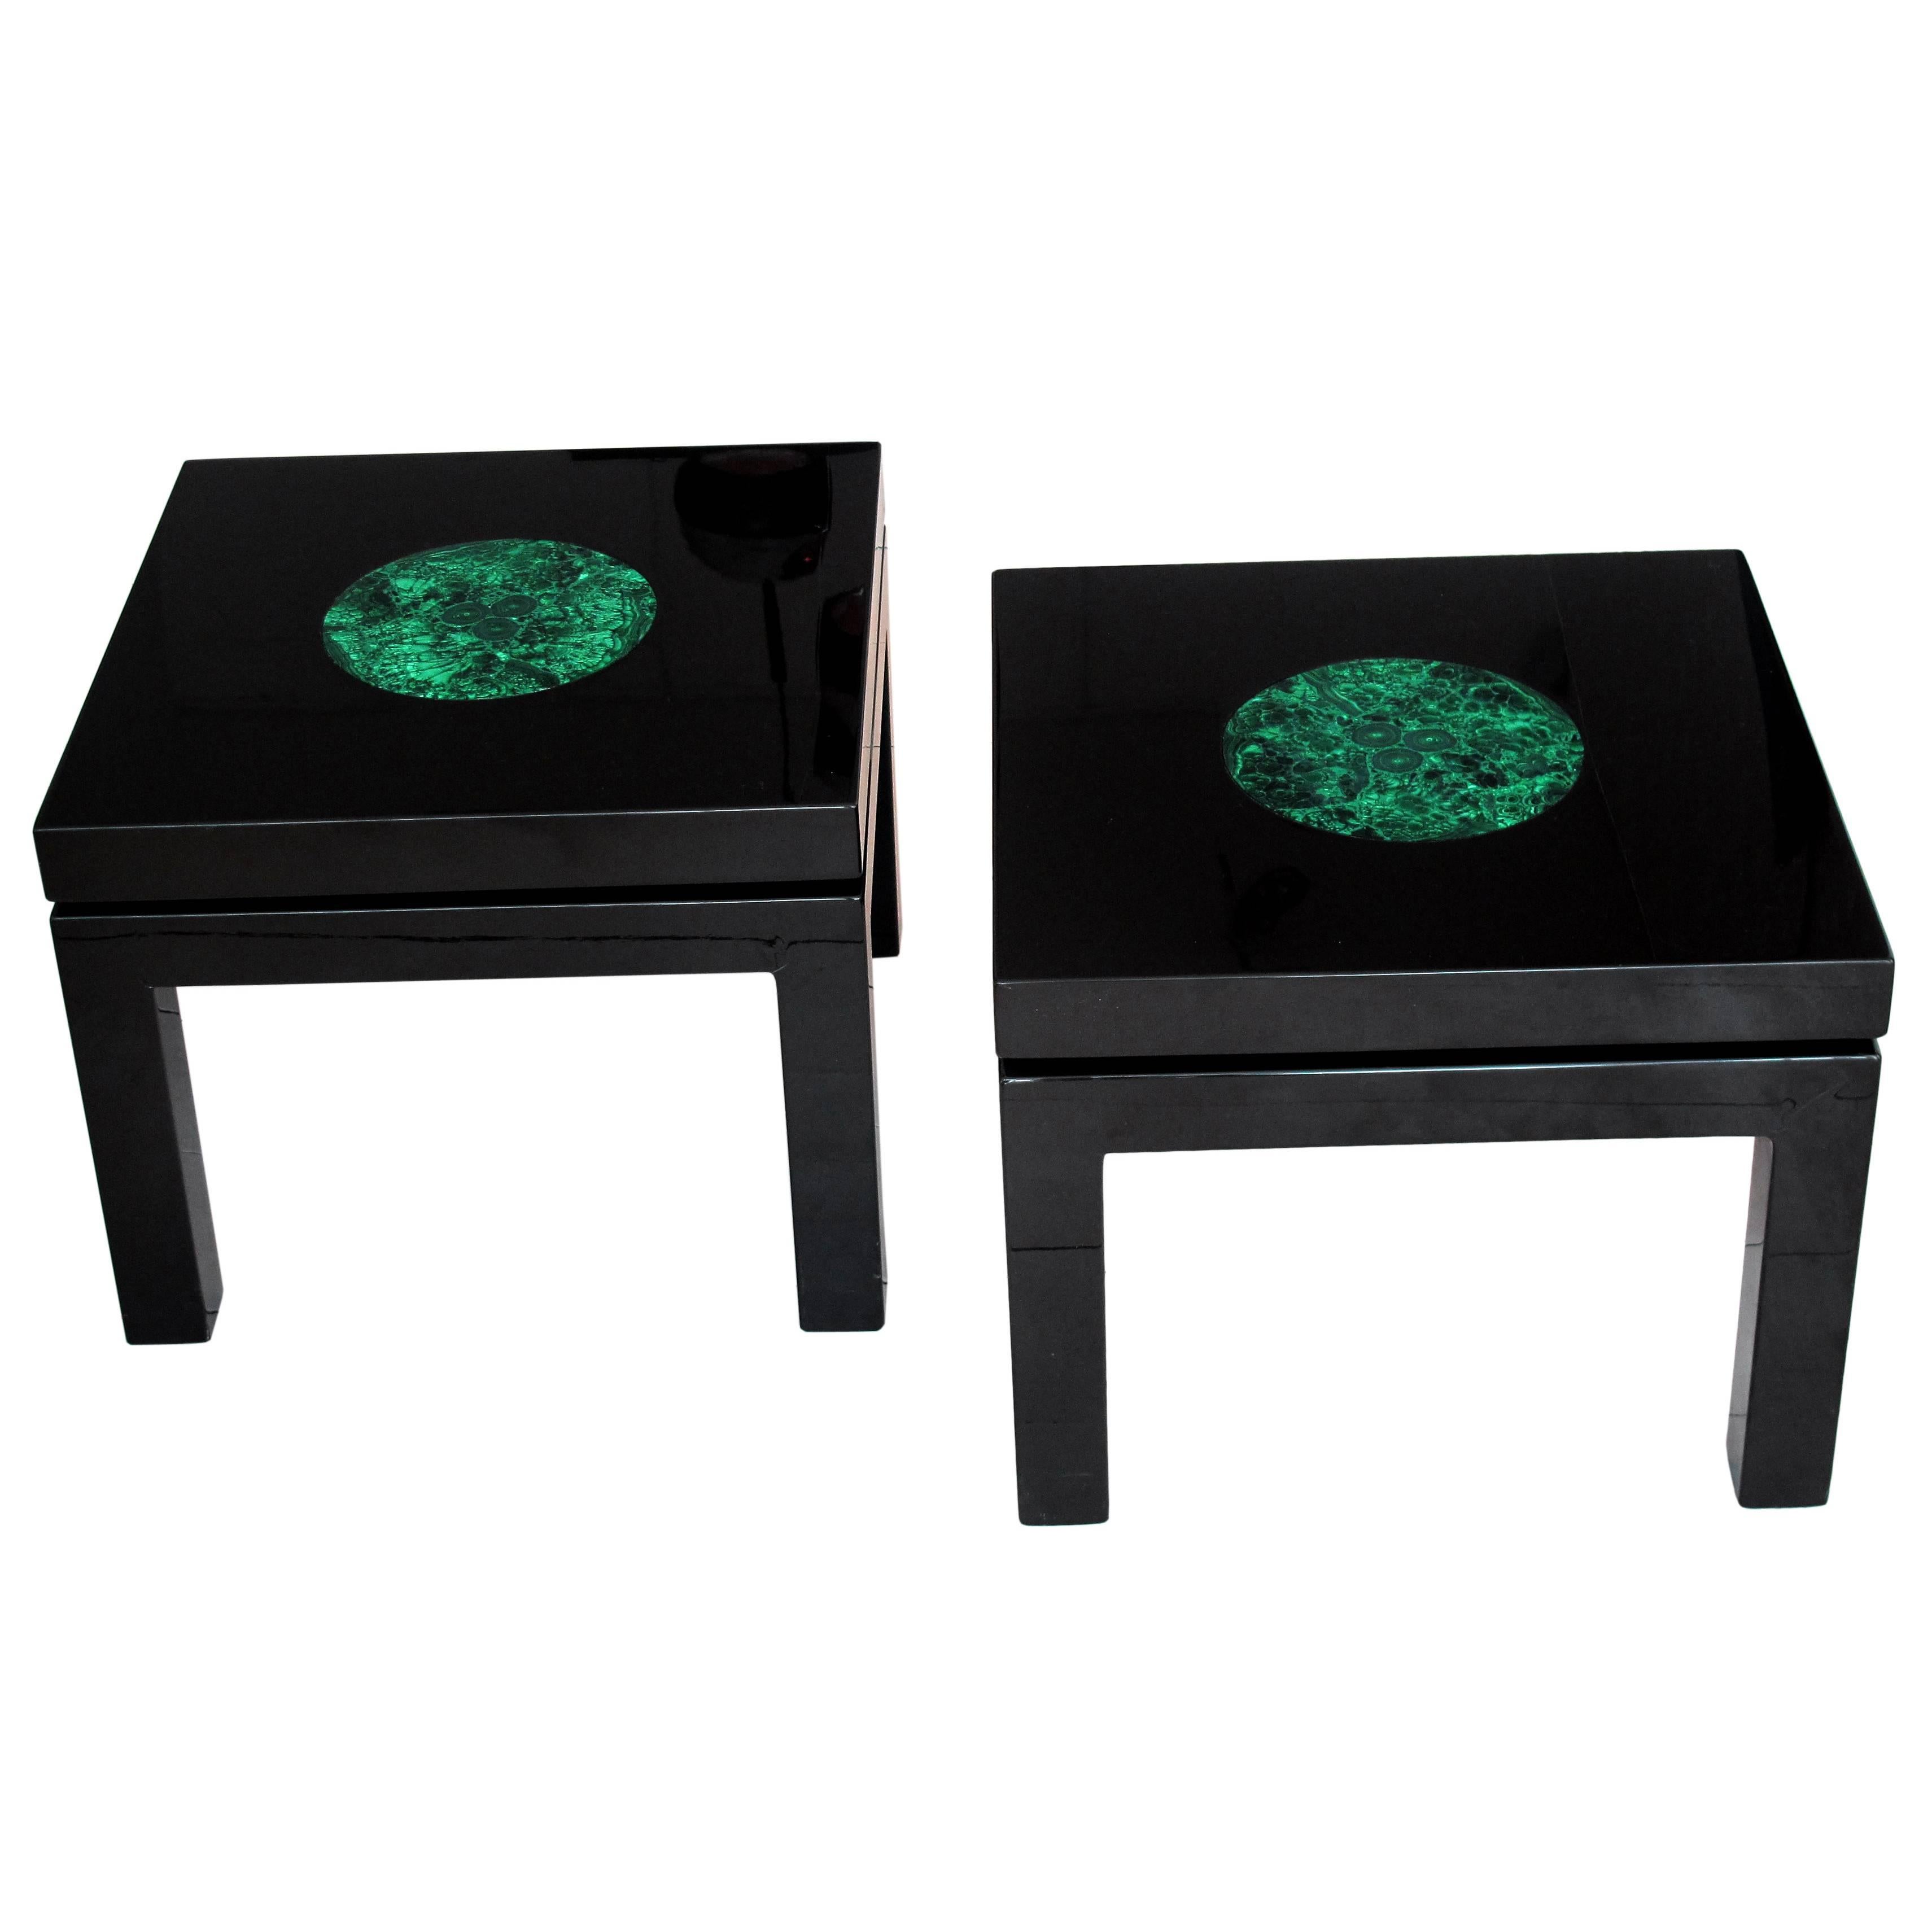 Fernand Dresse Pair of Black Lacquer Side Tables with Malachite Inclusions For Sale